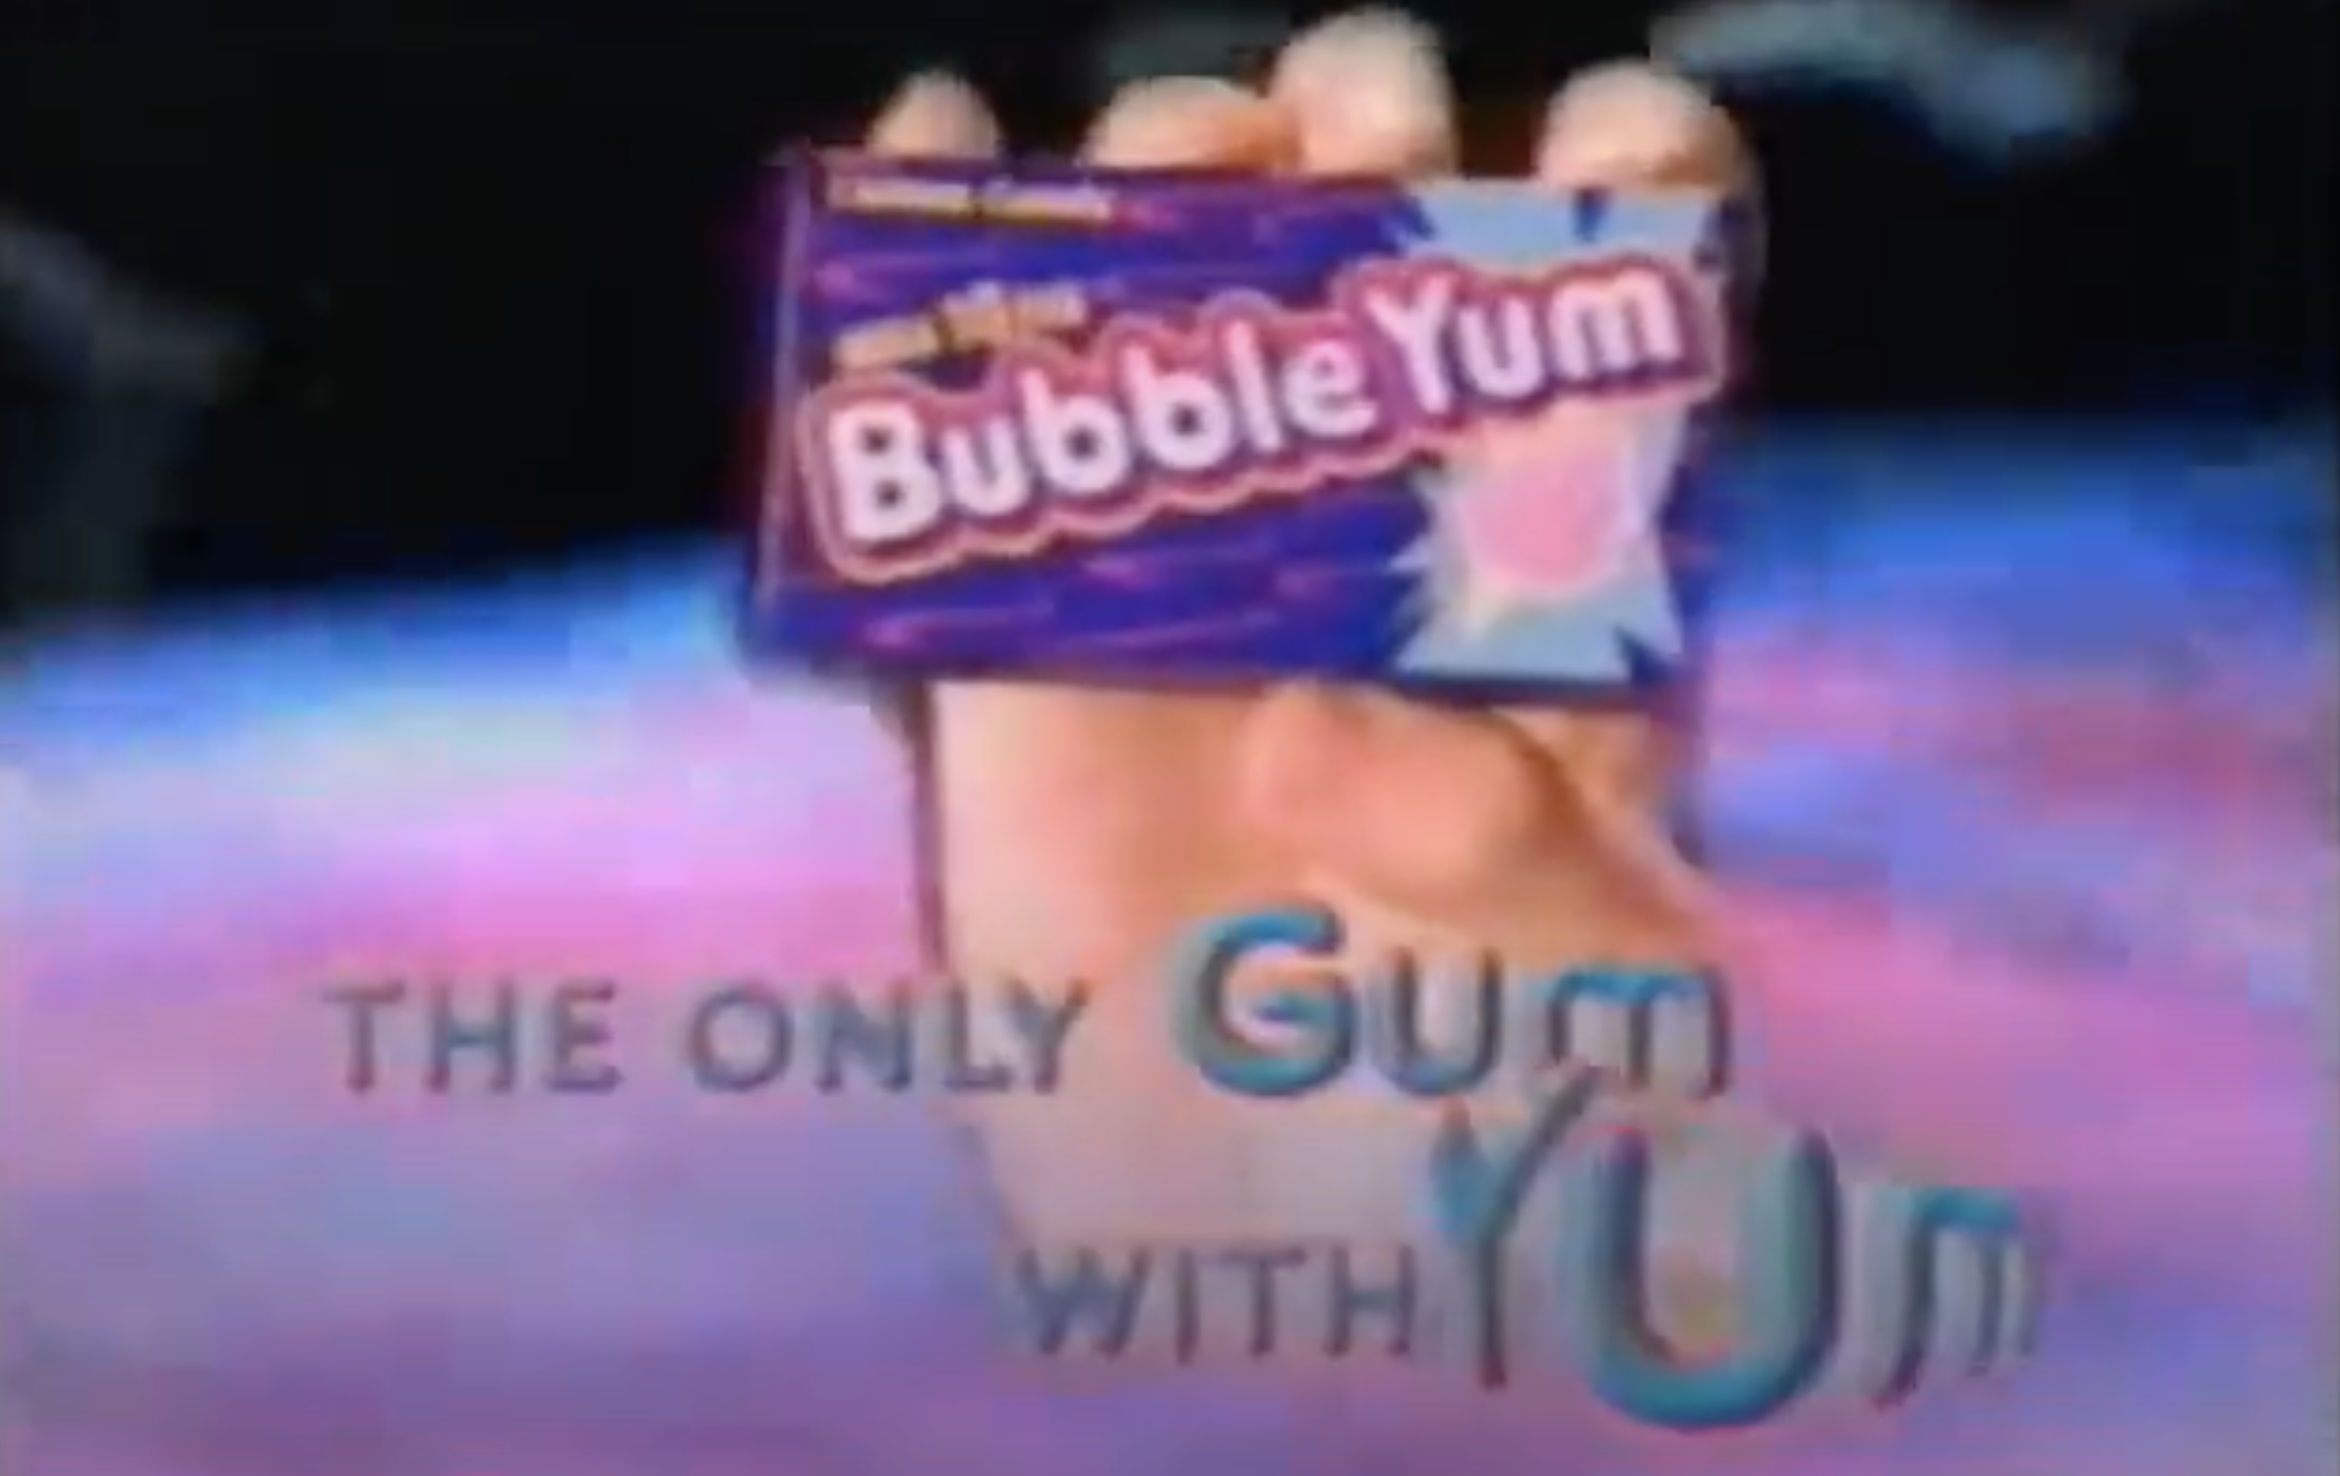 Screenshot of Bubble Yum commercial with pack of gum and text: &quot;the only gum with yum&quot;